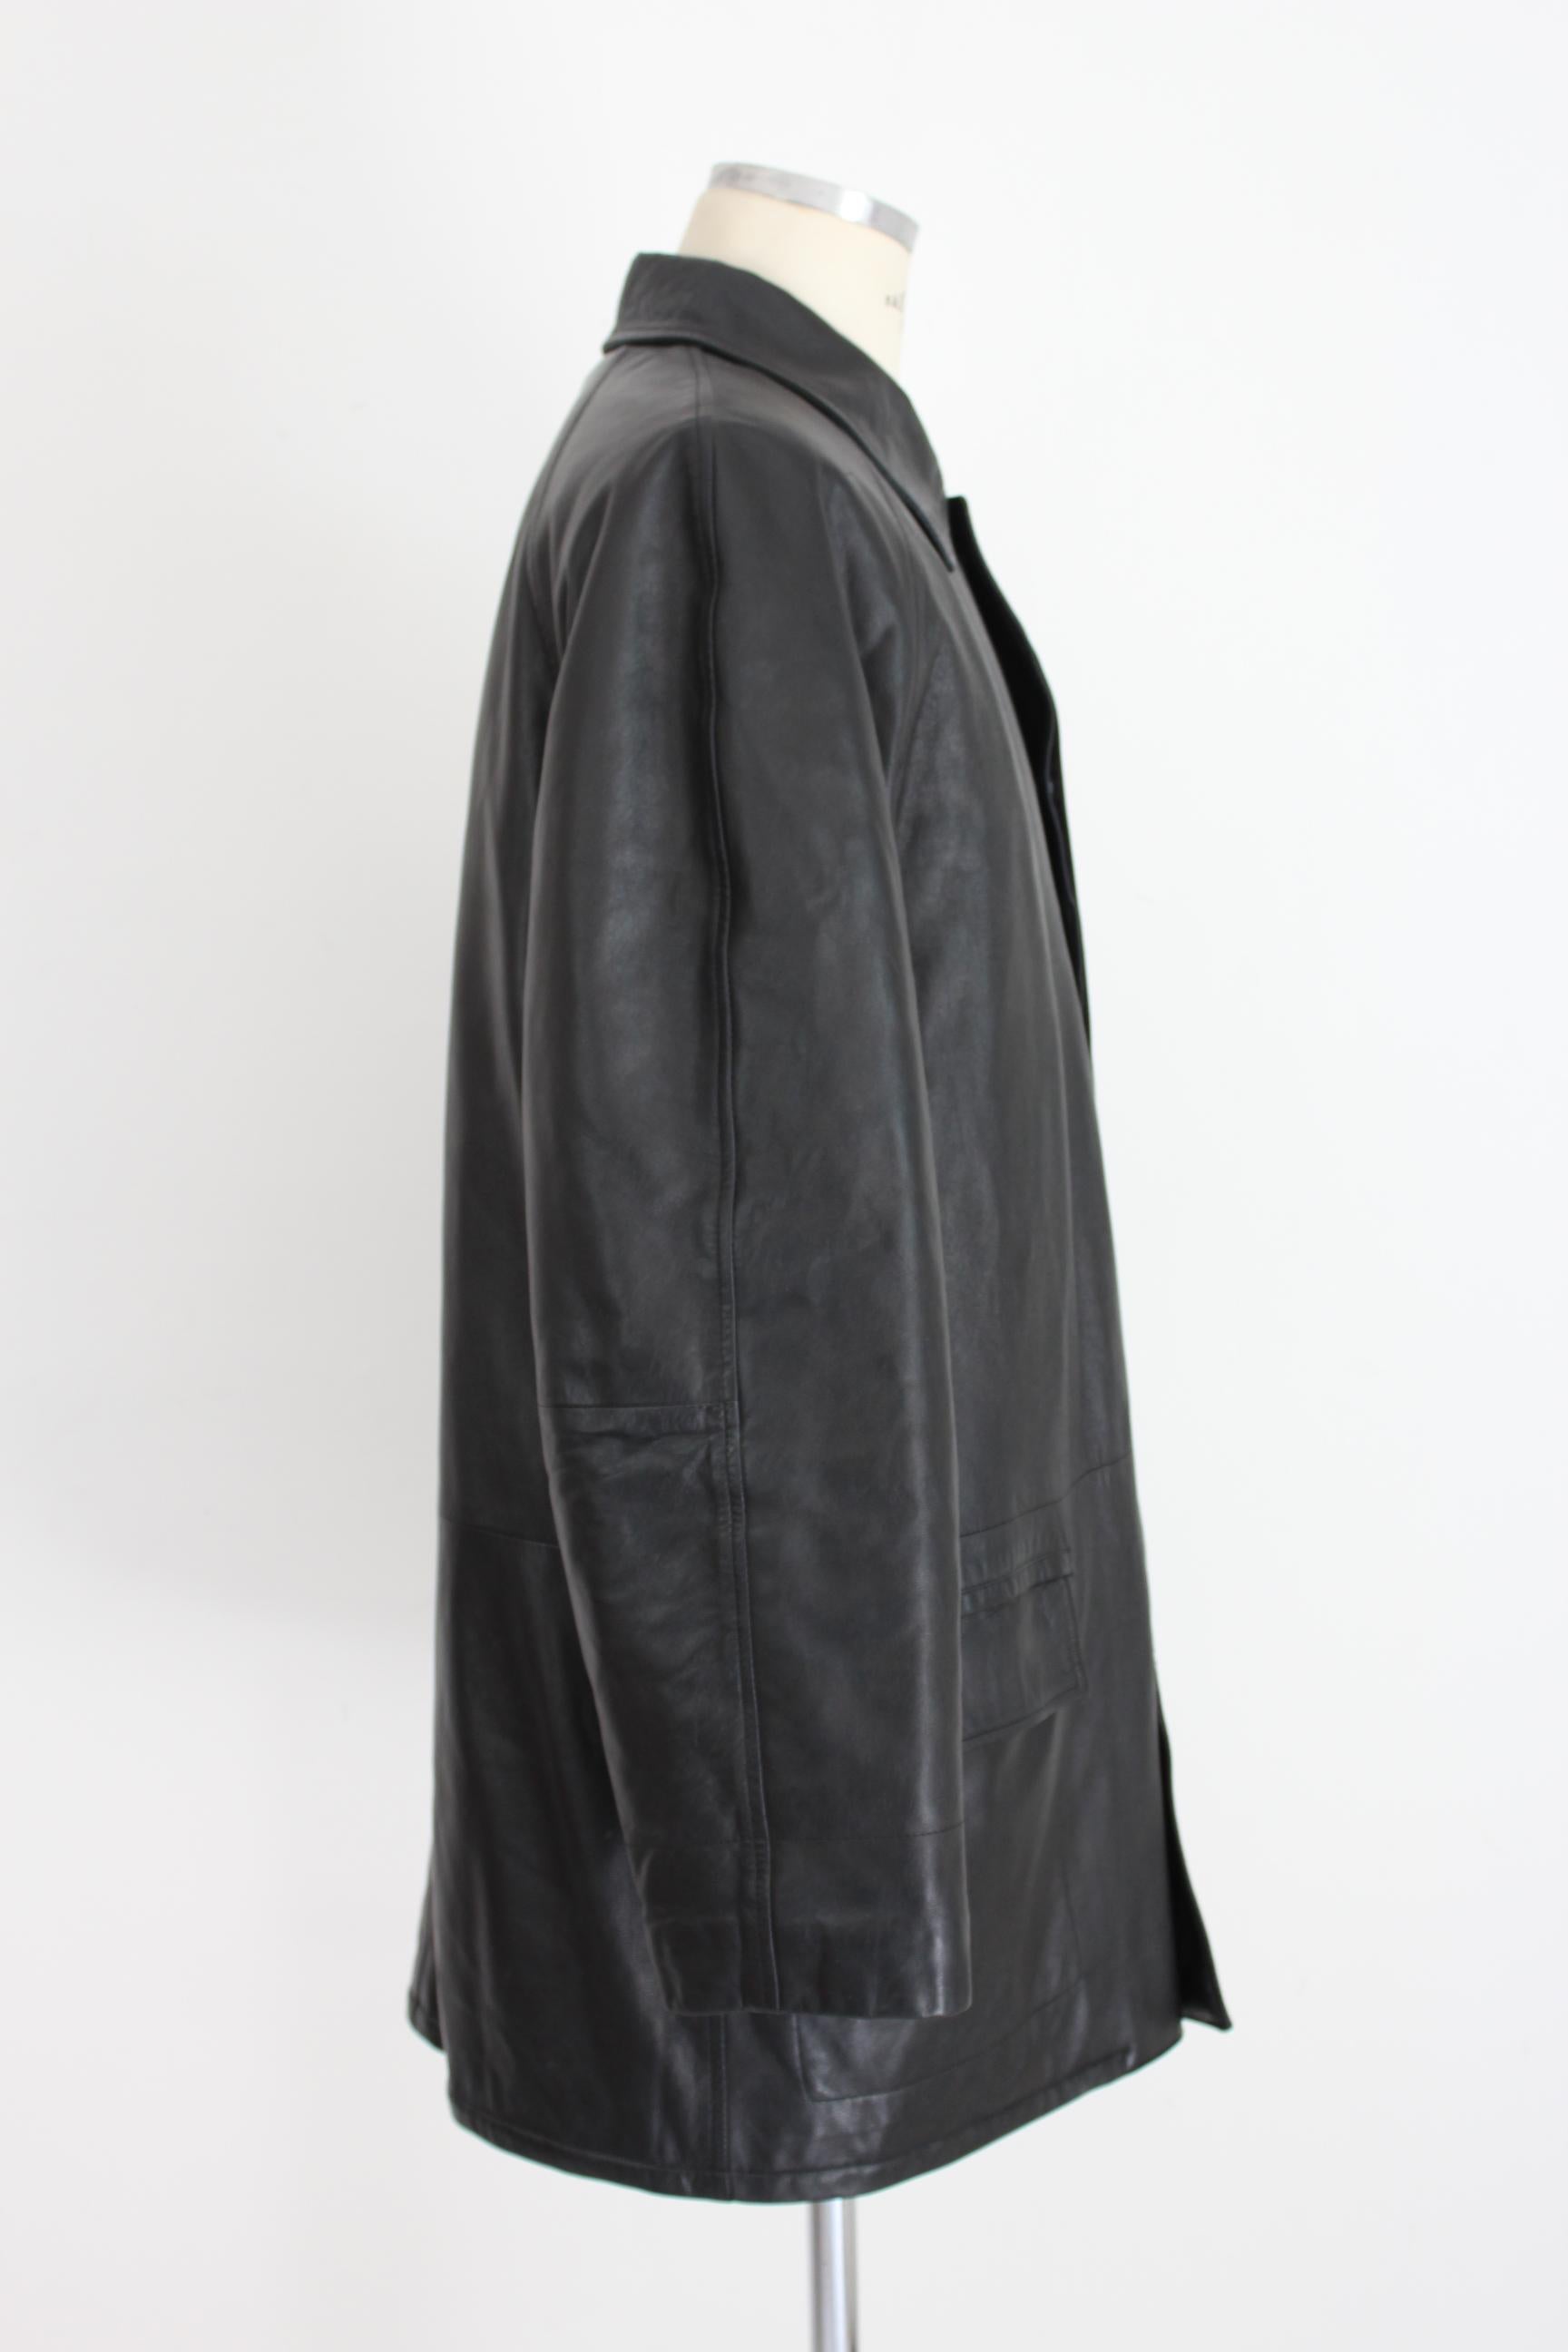 Gianni Versace Black Soft Leather Long Coat 1990s In Good Condition In Brindisi, Bt